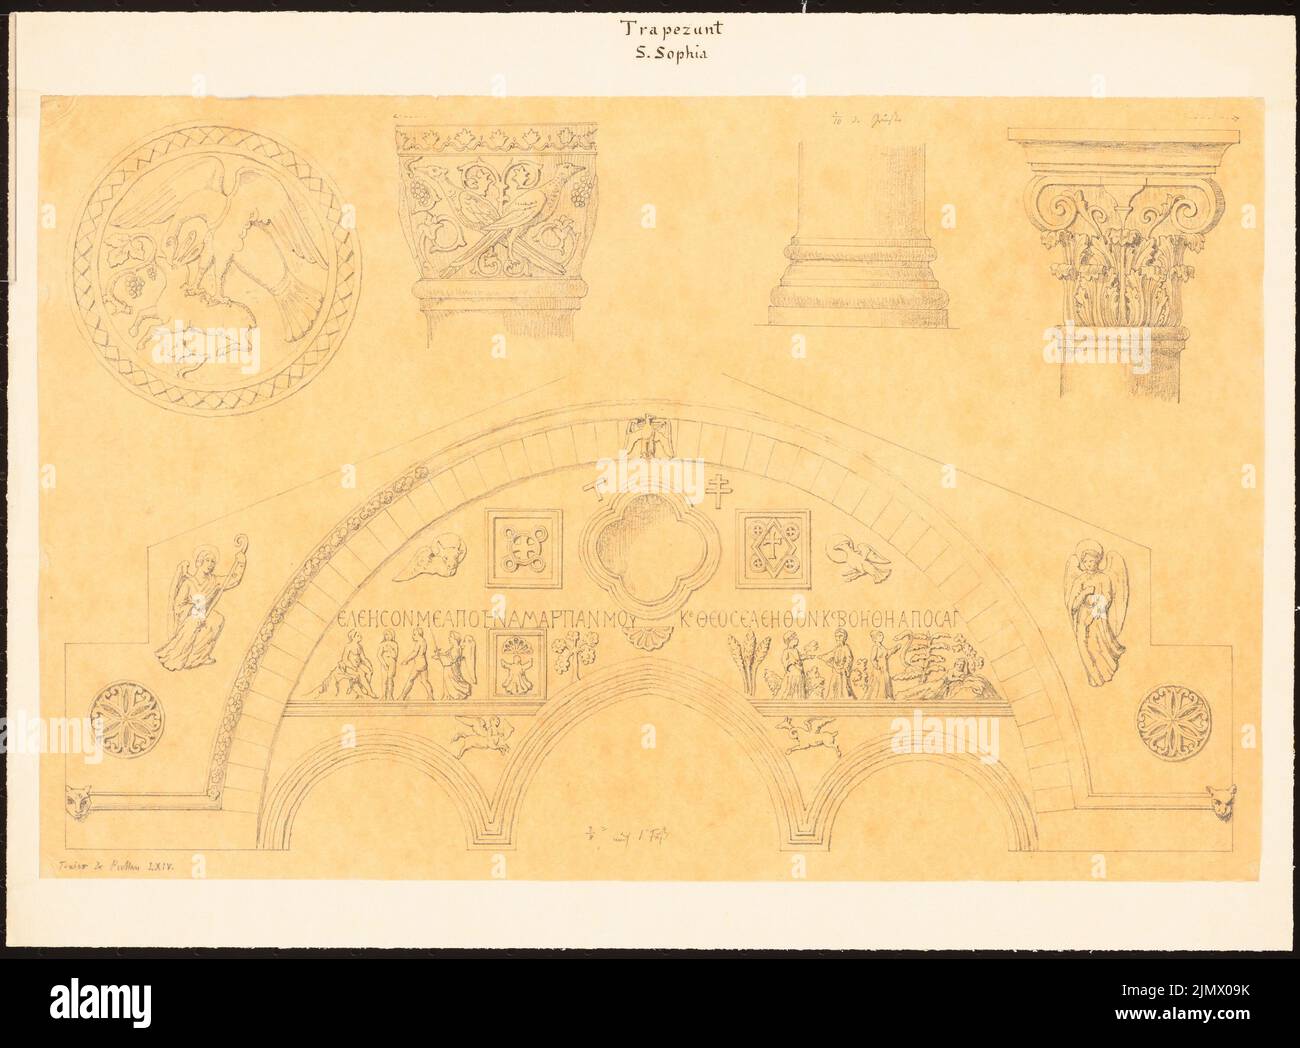 Quast Ferdinand von (1807-1877), Hagia Sophia in Trapezunt, Turkey (without date): vaults with ancient Greek inscription and all-roundtails with Christian motifs, dimensions (foot) (follow-up or traiting according to Charles Texier and. Pencil on Transparent, 29 , 7 x 40.2 cm (including scan edges) Quast Ferdinand von  (1807-1877): Hagia Sophia, Trapezunt Stock Photo